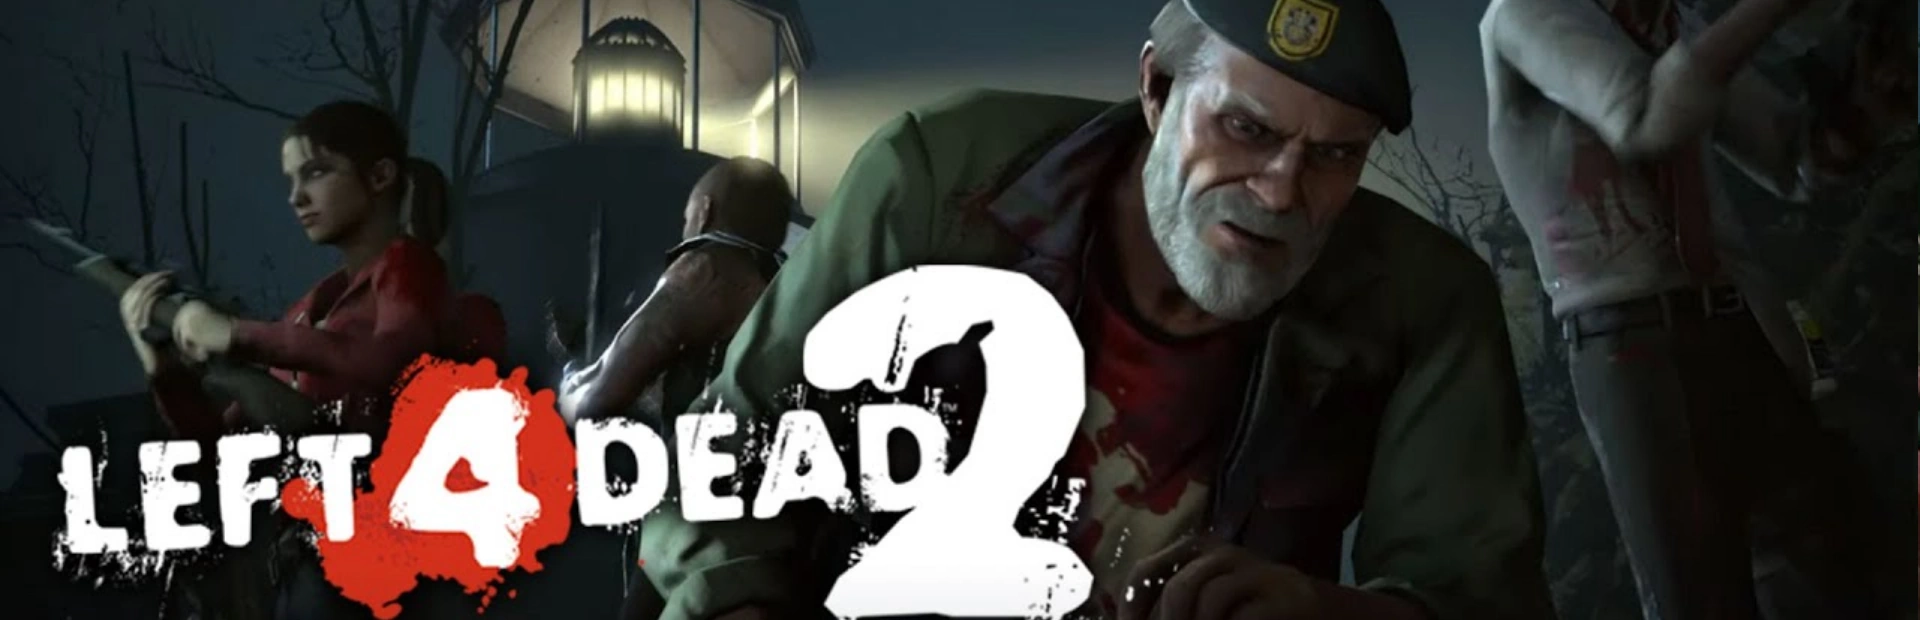 Left 4 Dead 2 The Last Stand.banner2